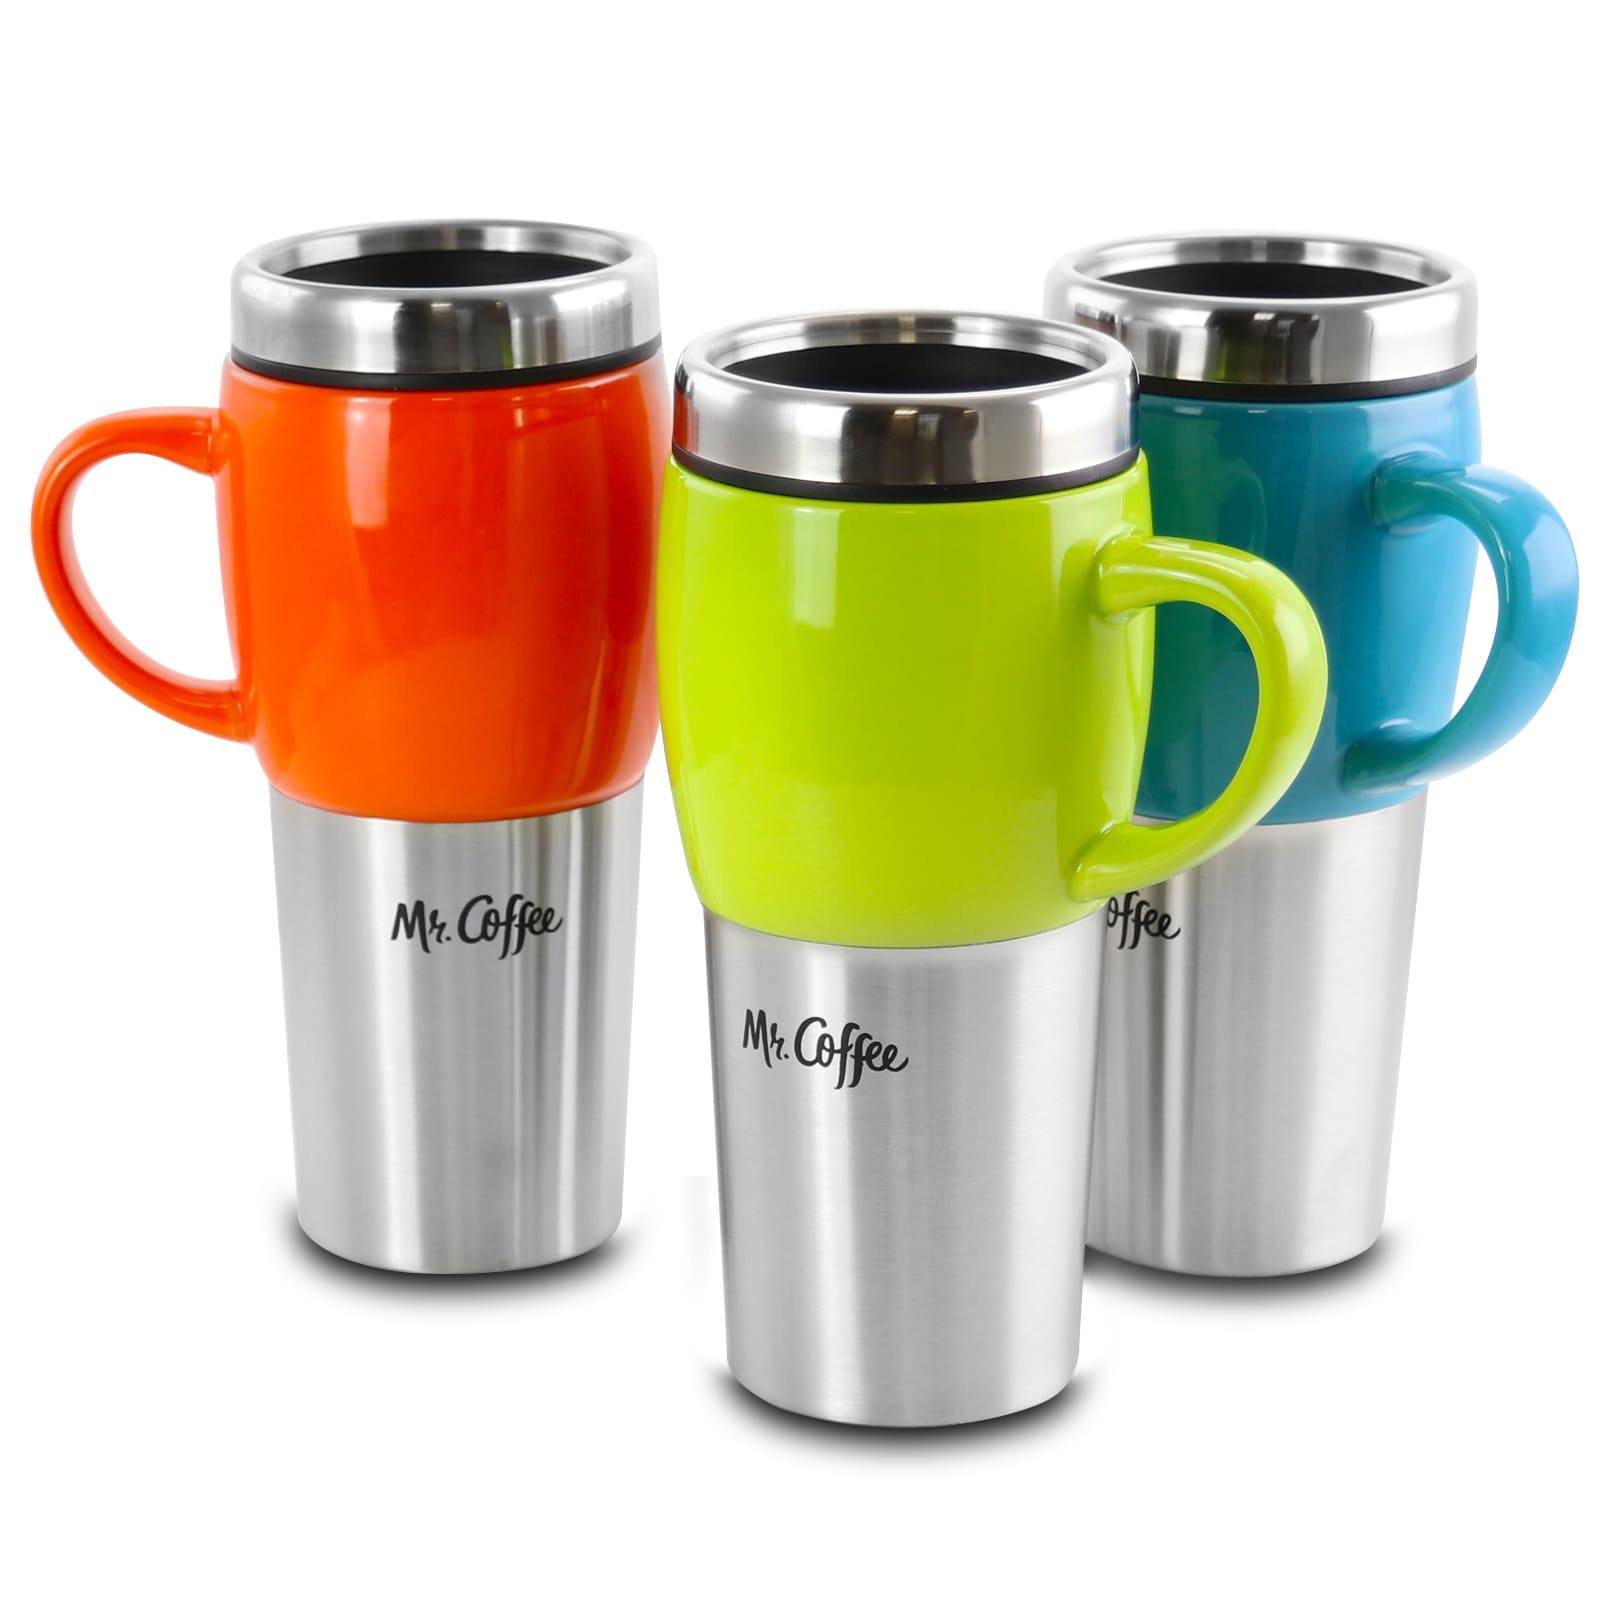 https://ak1.ostkcdn.com/images/products/is/images/direct/902e629445ad8e751a79d78793448332c236ff8d/Mr.-Coffee-Traverse-3-Piece-16-Ounce-Stainless-Steel-and-Ceramic-Travel-Mug-and-Lid-in-Red%2C-Blue-and-Green.jpg